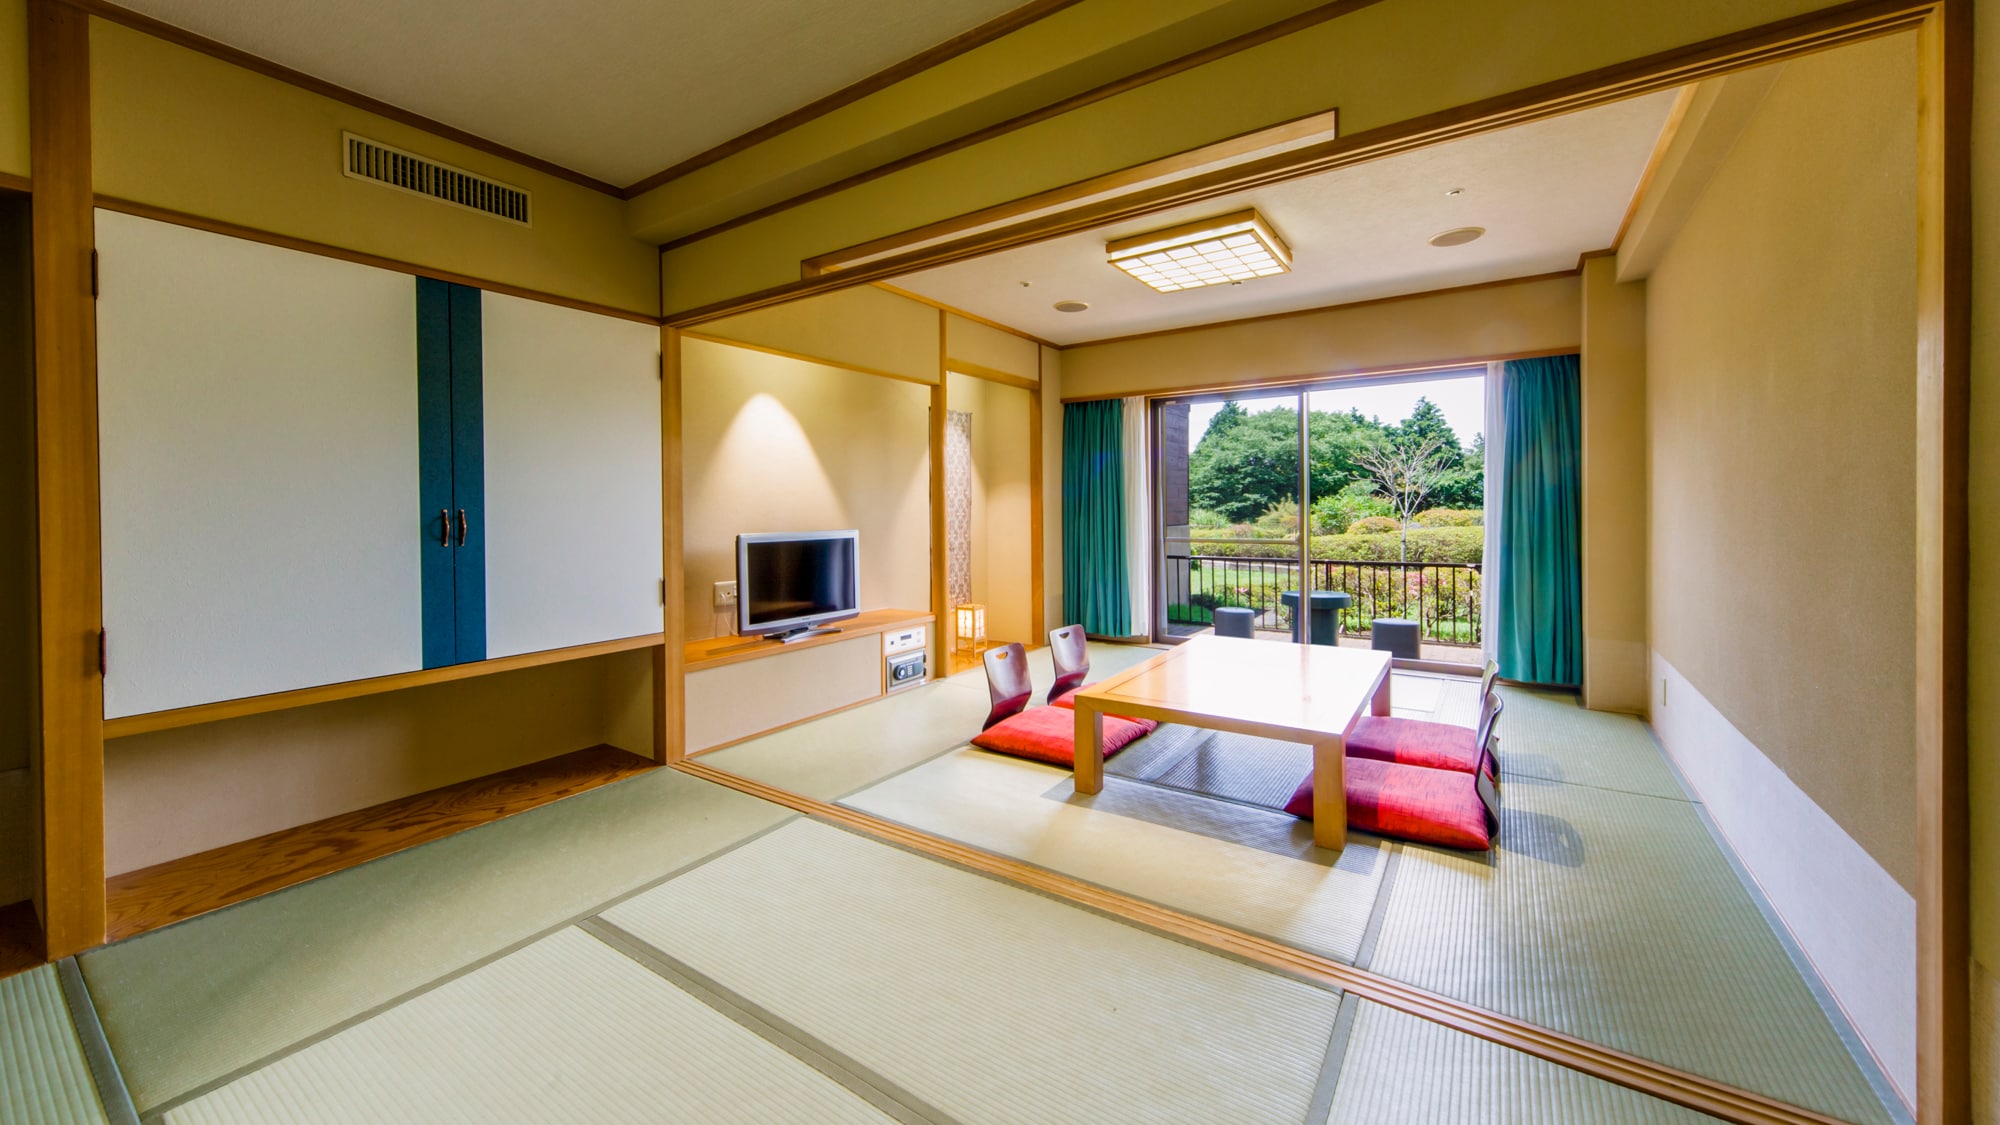 An example of a reasonable Japanese-style room